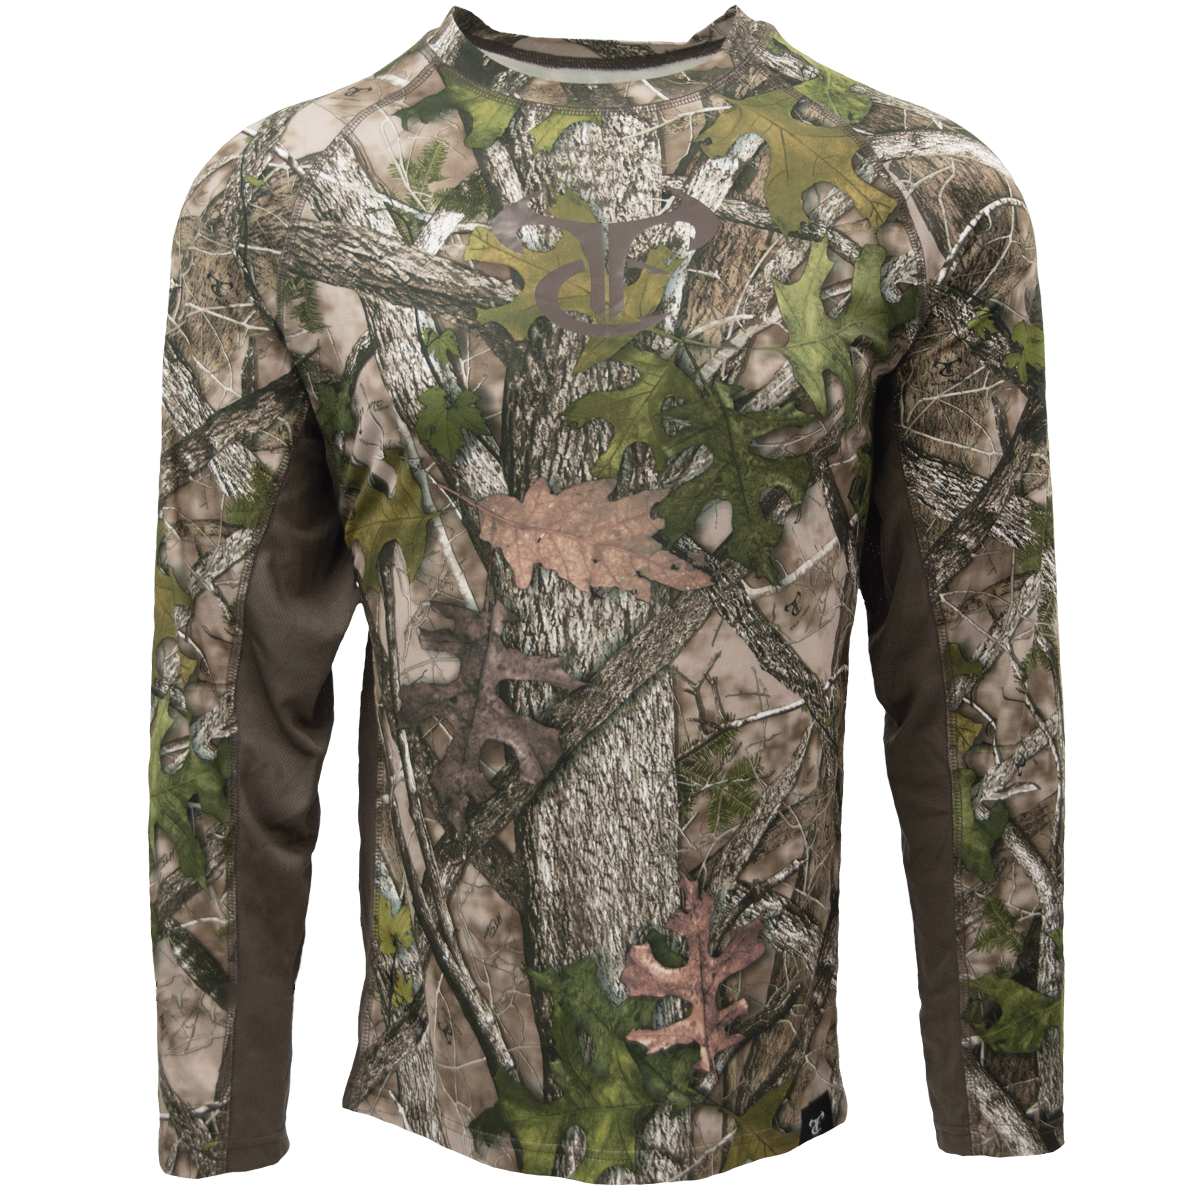 Hunting - The Official TrueTimber Store